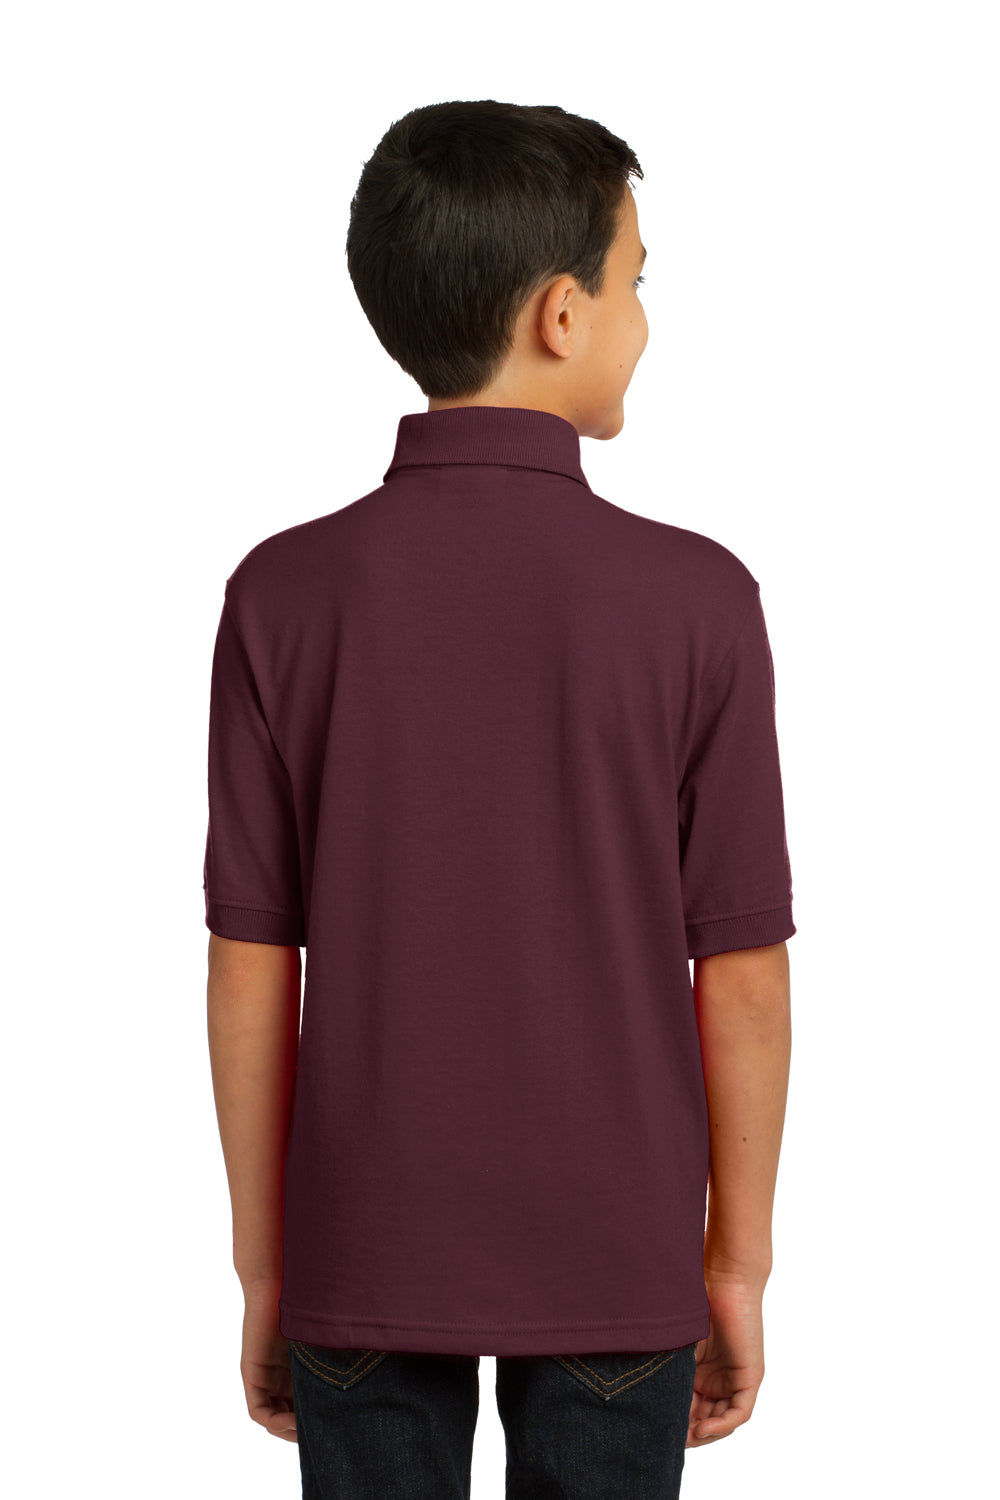 Port & Company KP55Y Youth Core Stain Resistant Short Sleeve Polo Shirt Maroon Back